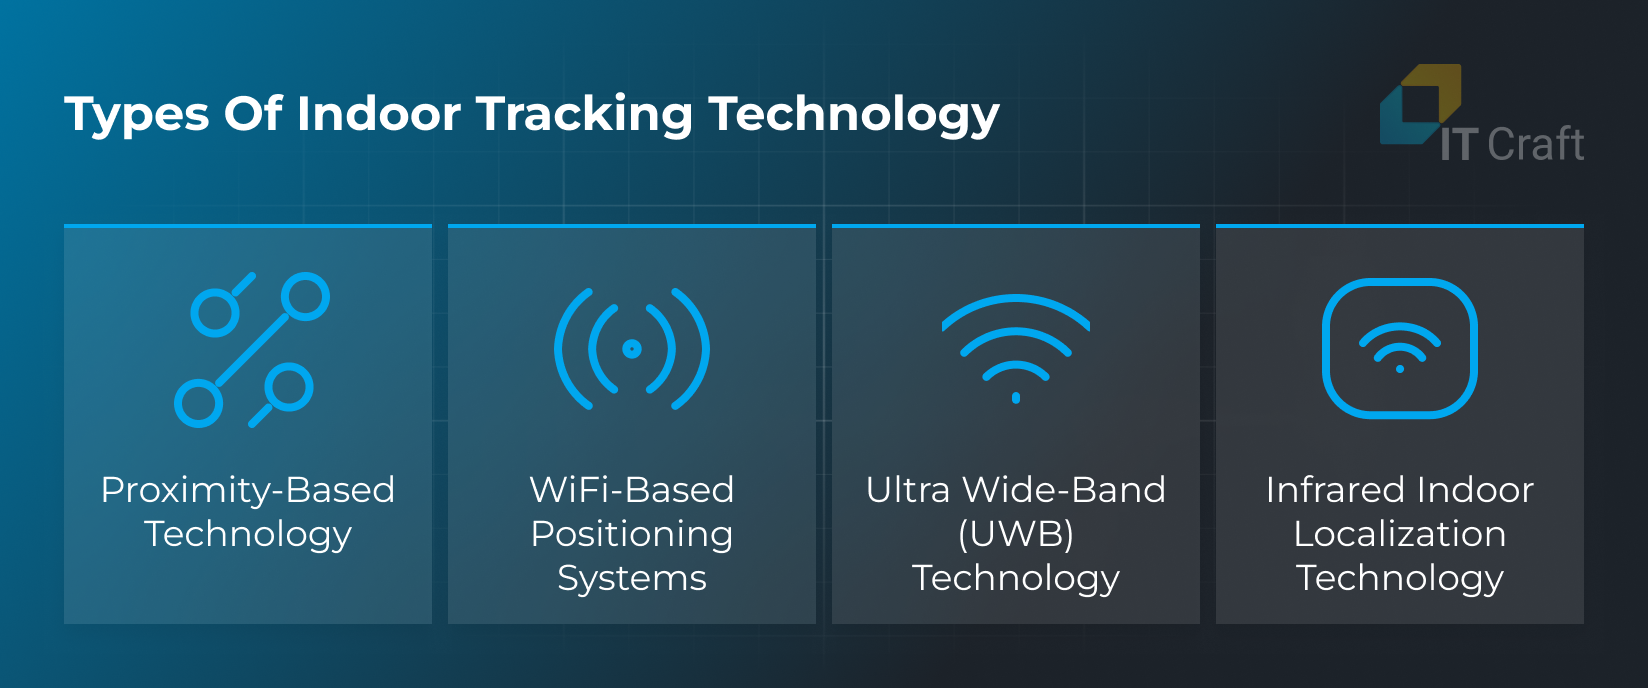 indoor tracking technology